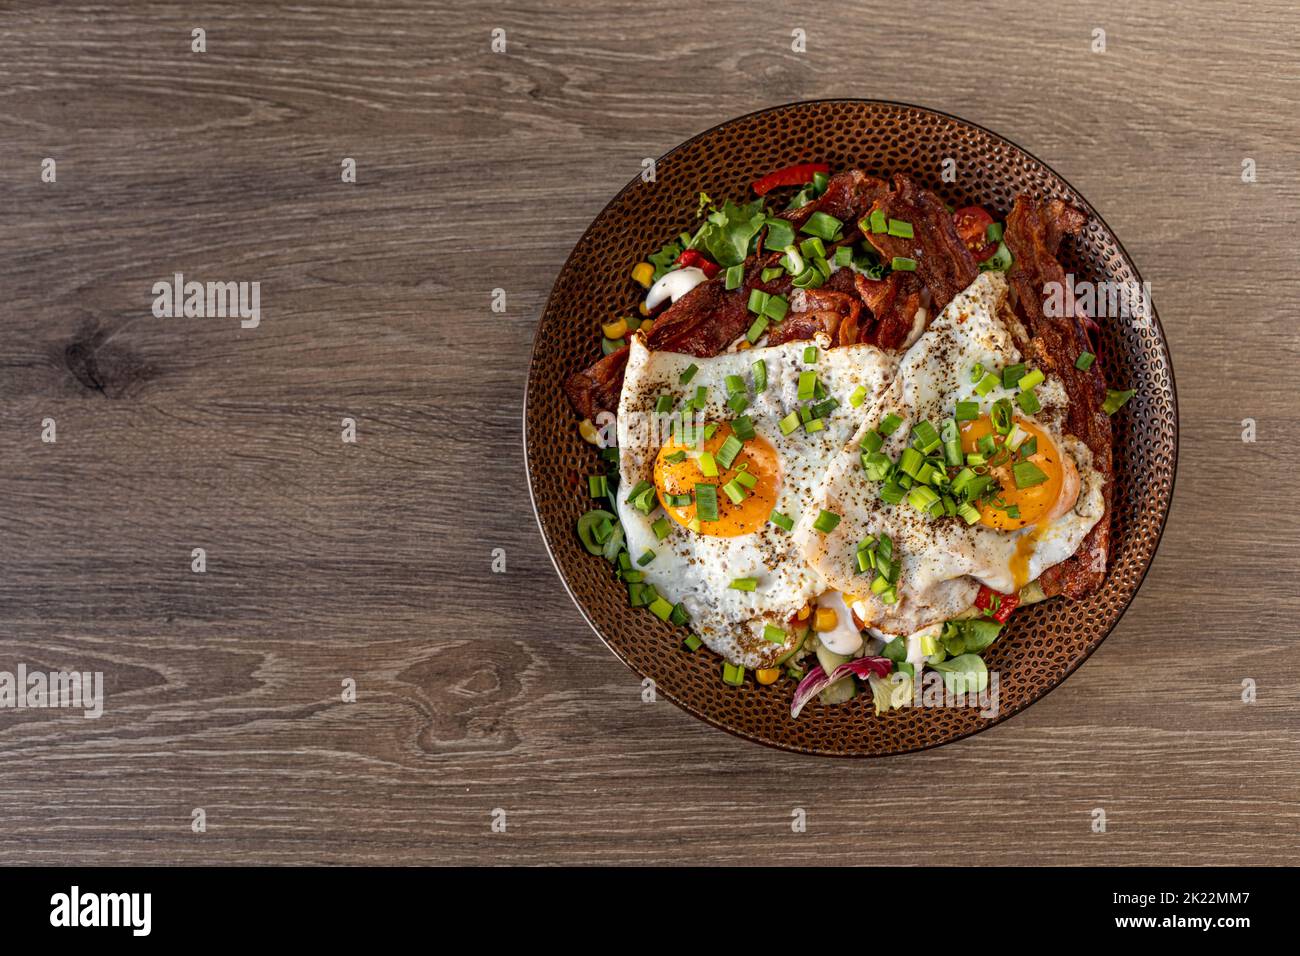 Tasty, appetizing fried egg, scrambled egg, with meat and bacon with green grocery and corn on plate on wooden table Stock Photo